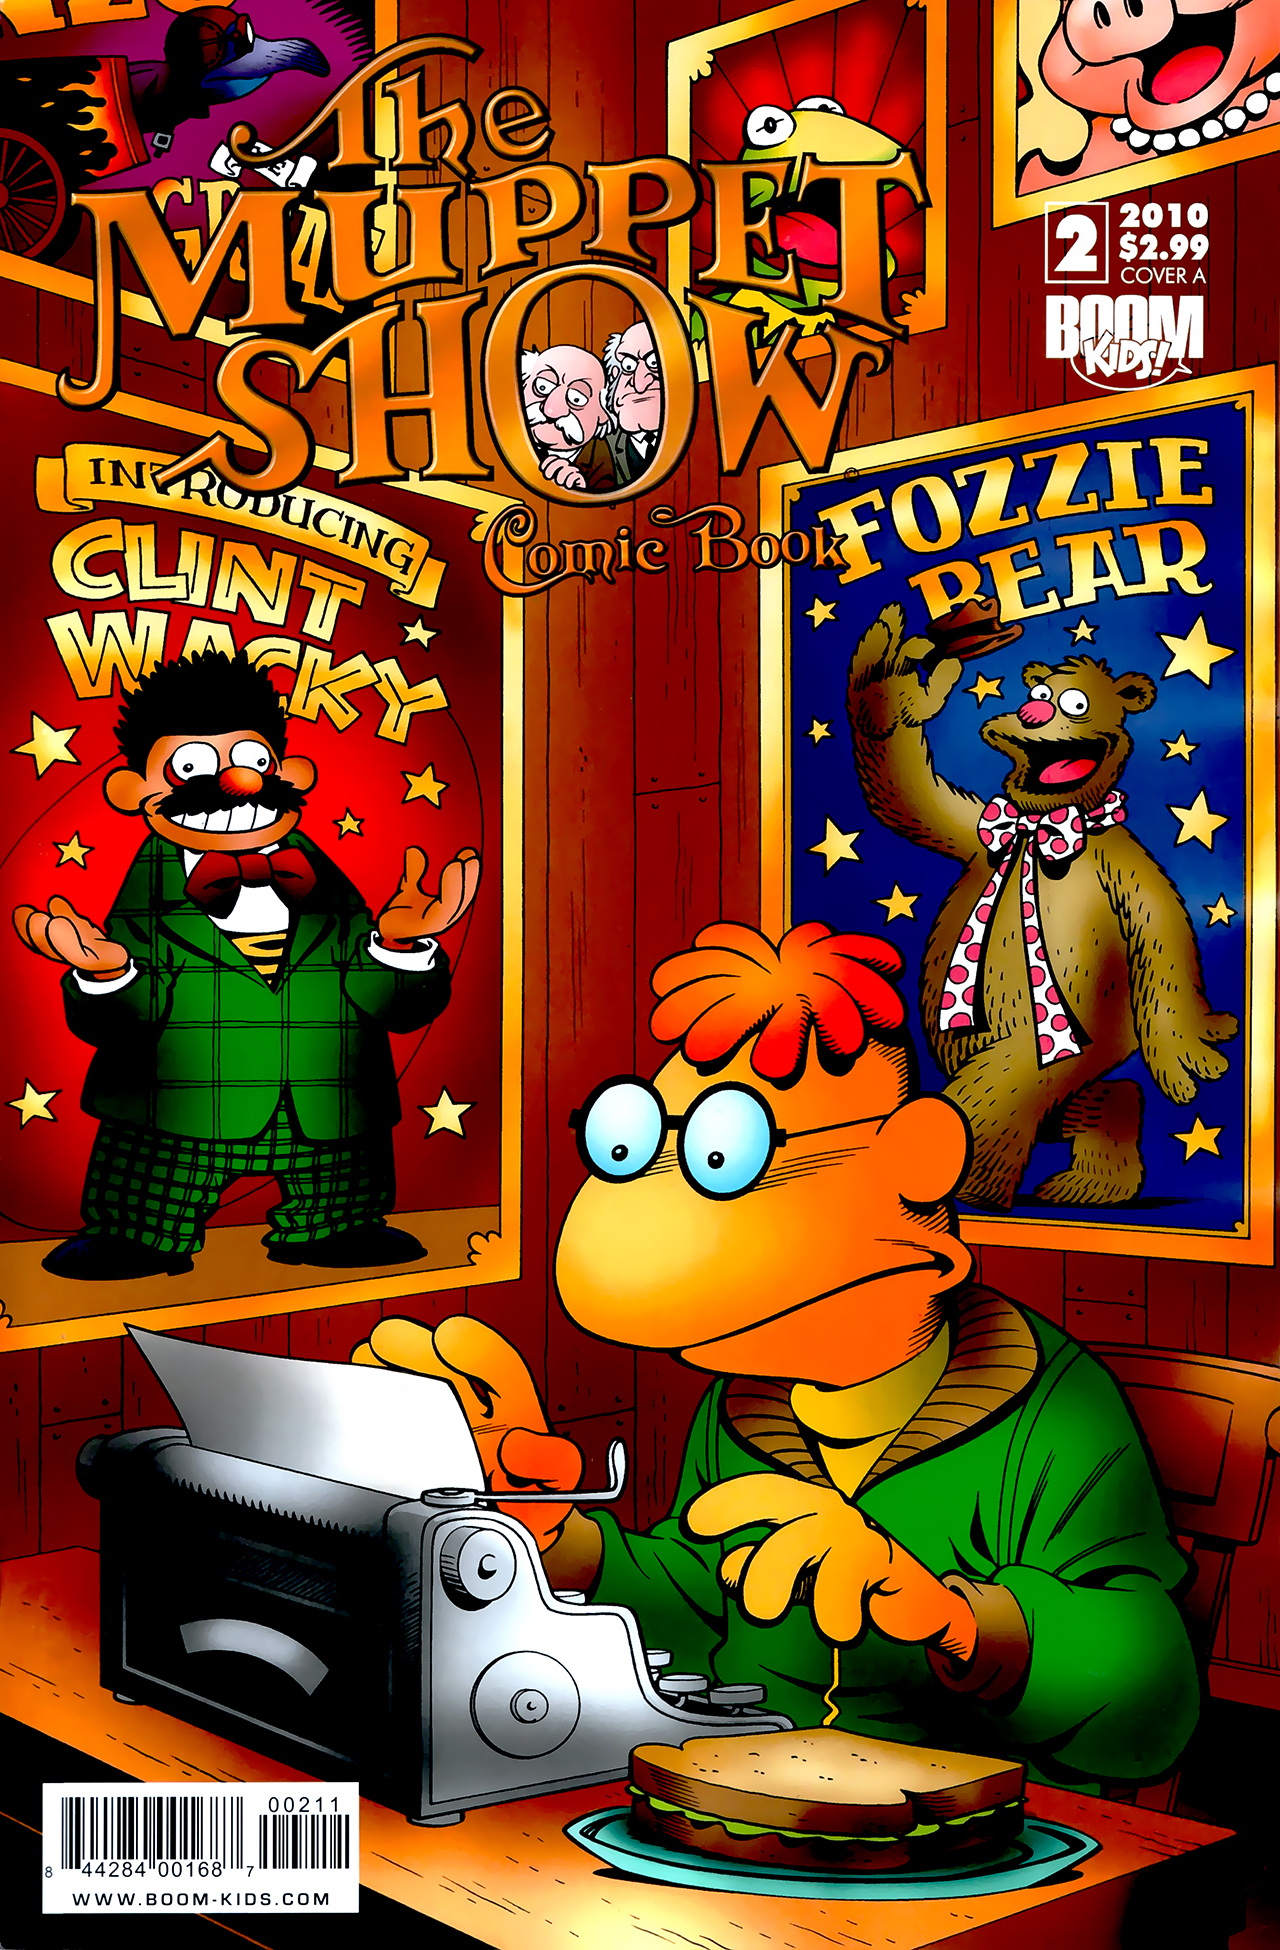 Read online The Muppet Show: The Comic Book comic -  Issue #2 - 1